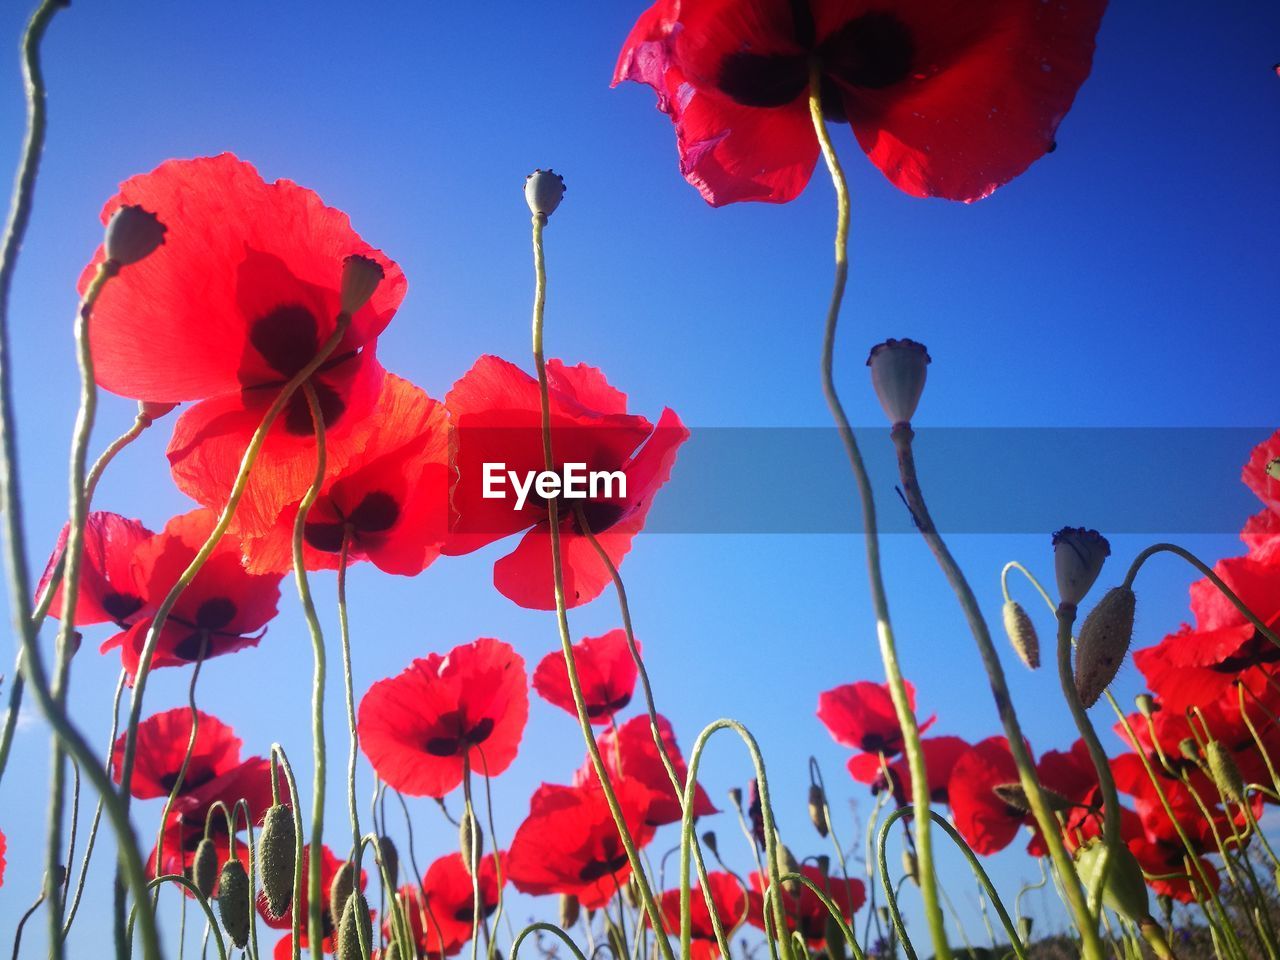 CLOSE-UP OF RED POPPIES AGAINST SKY